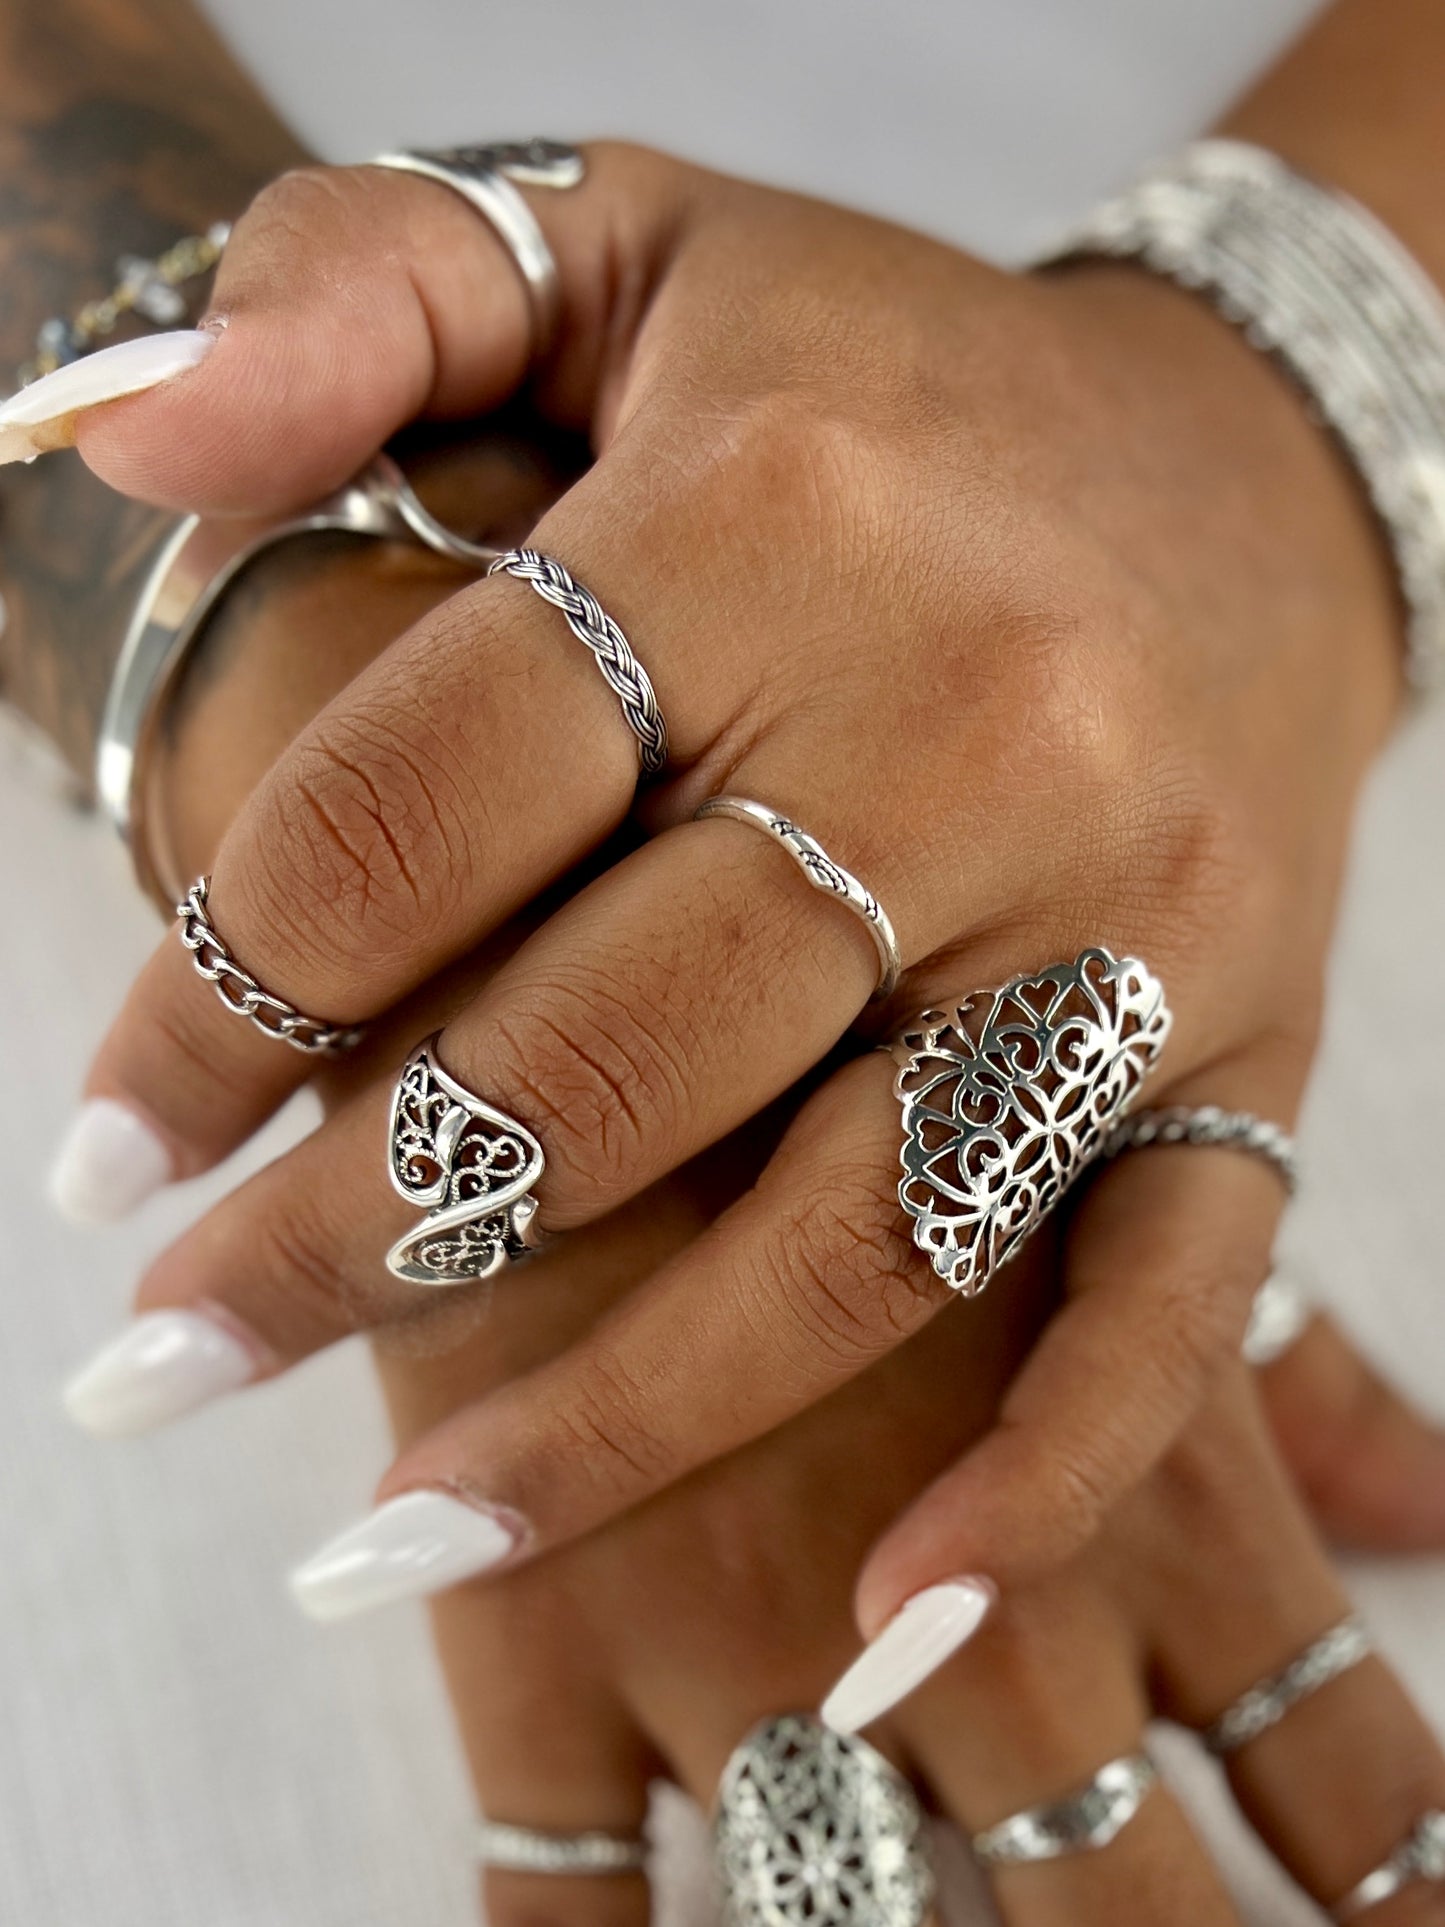 A woman's hands adorned with vintage allure through Super Silver Triple Strand Braided Bands, showcasing a minimalist bohemian flair with a delicate braided design.